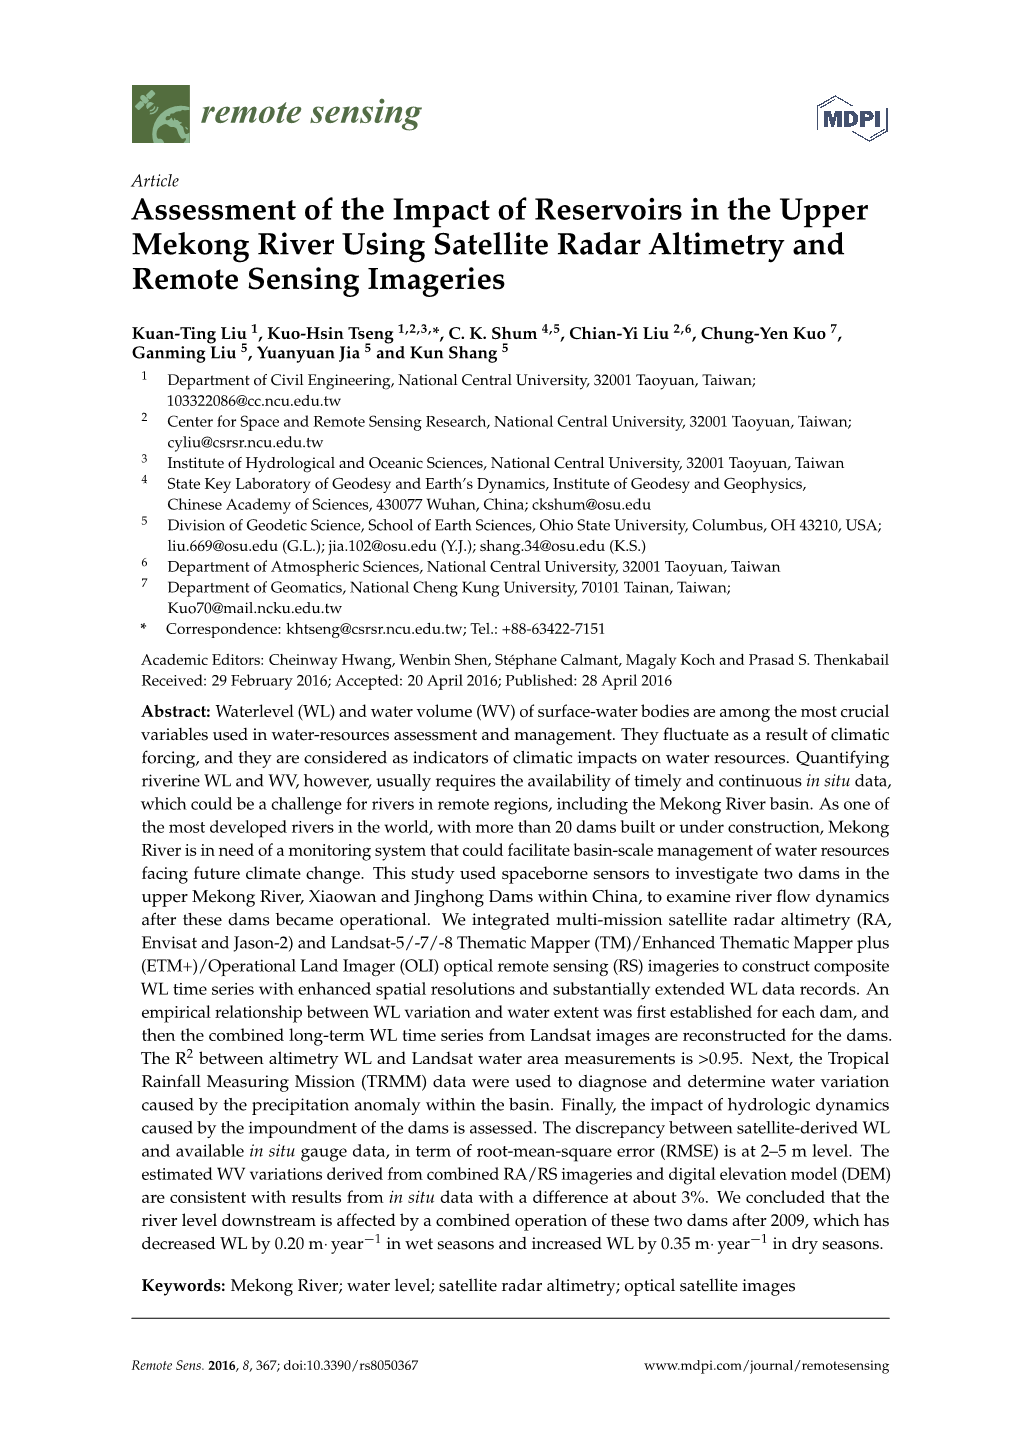 Assessment of the Impact of Reservoirs in the Upper Mekong River Using Satellite Radar Altimetry and Remote Sensing Imageries